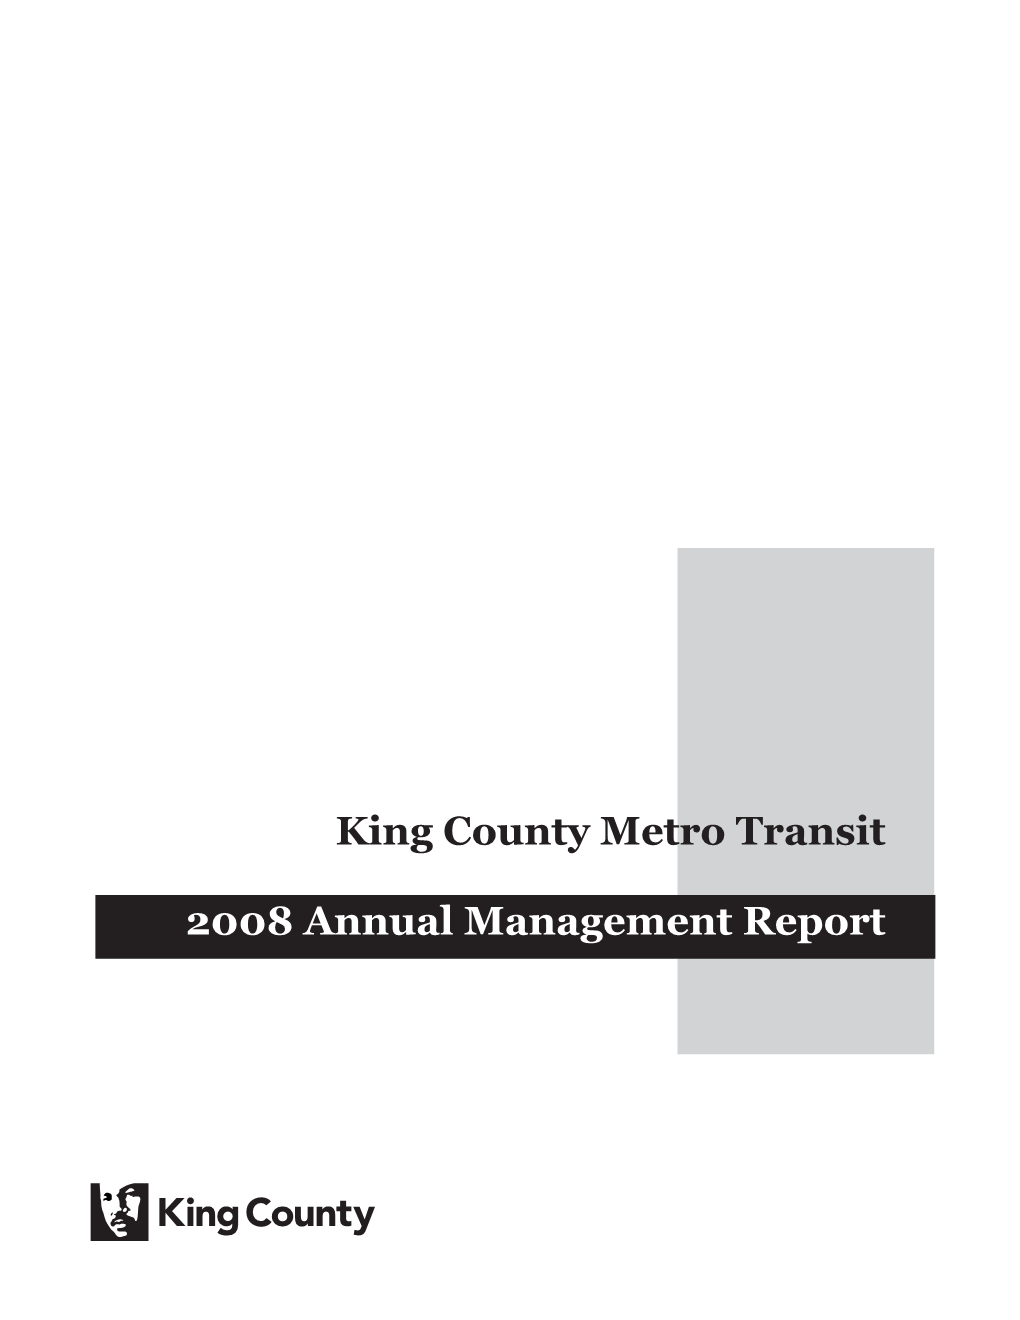 King County Metro Transit 2008 Annual Management Report